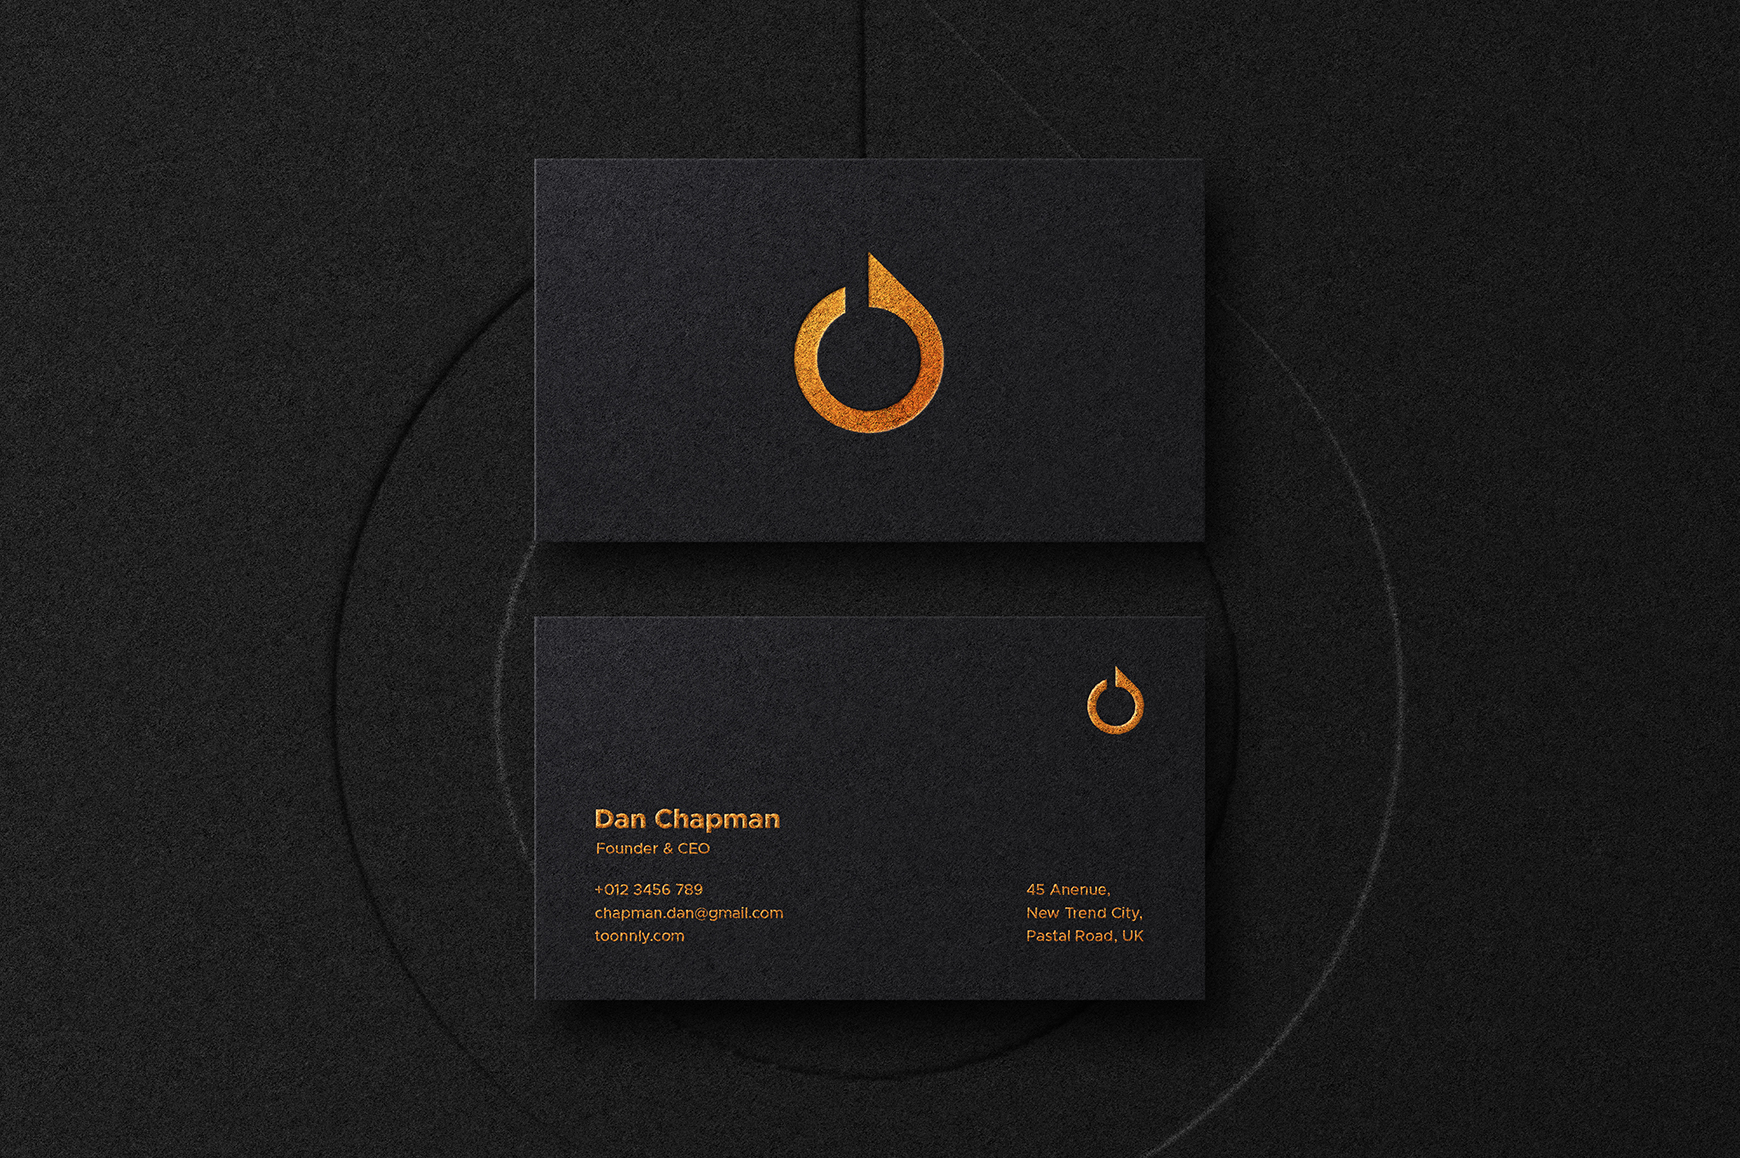 Luxury Business Card & Logo Mockup Graphic by Hakim Visuals